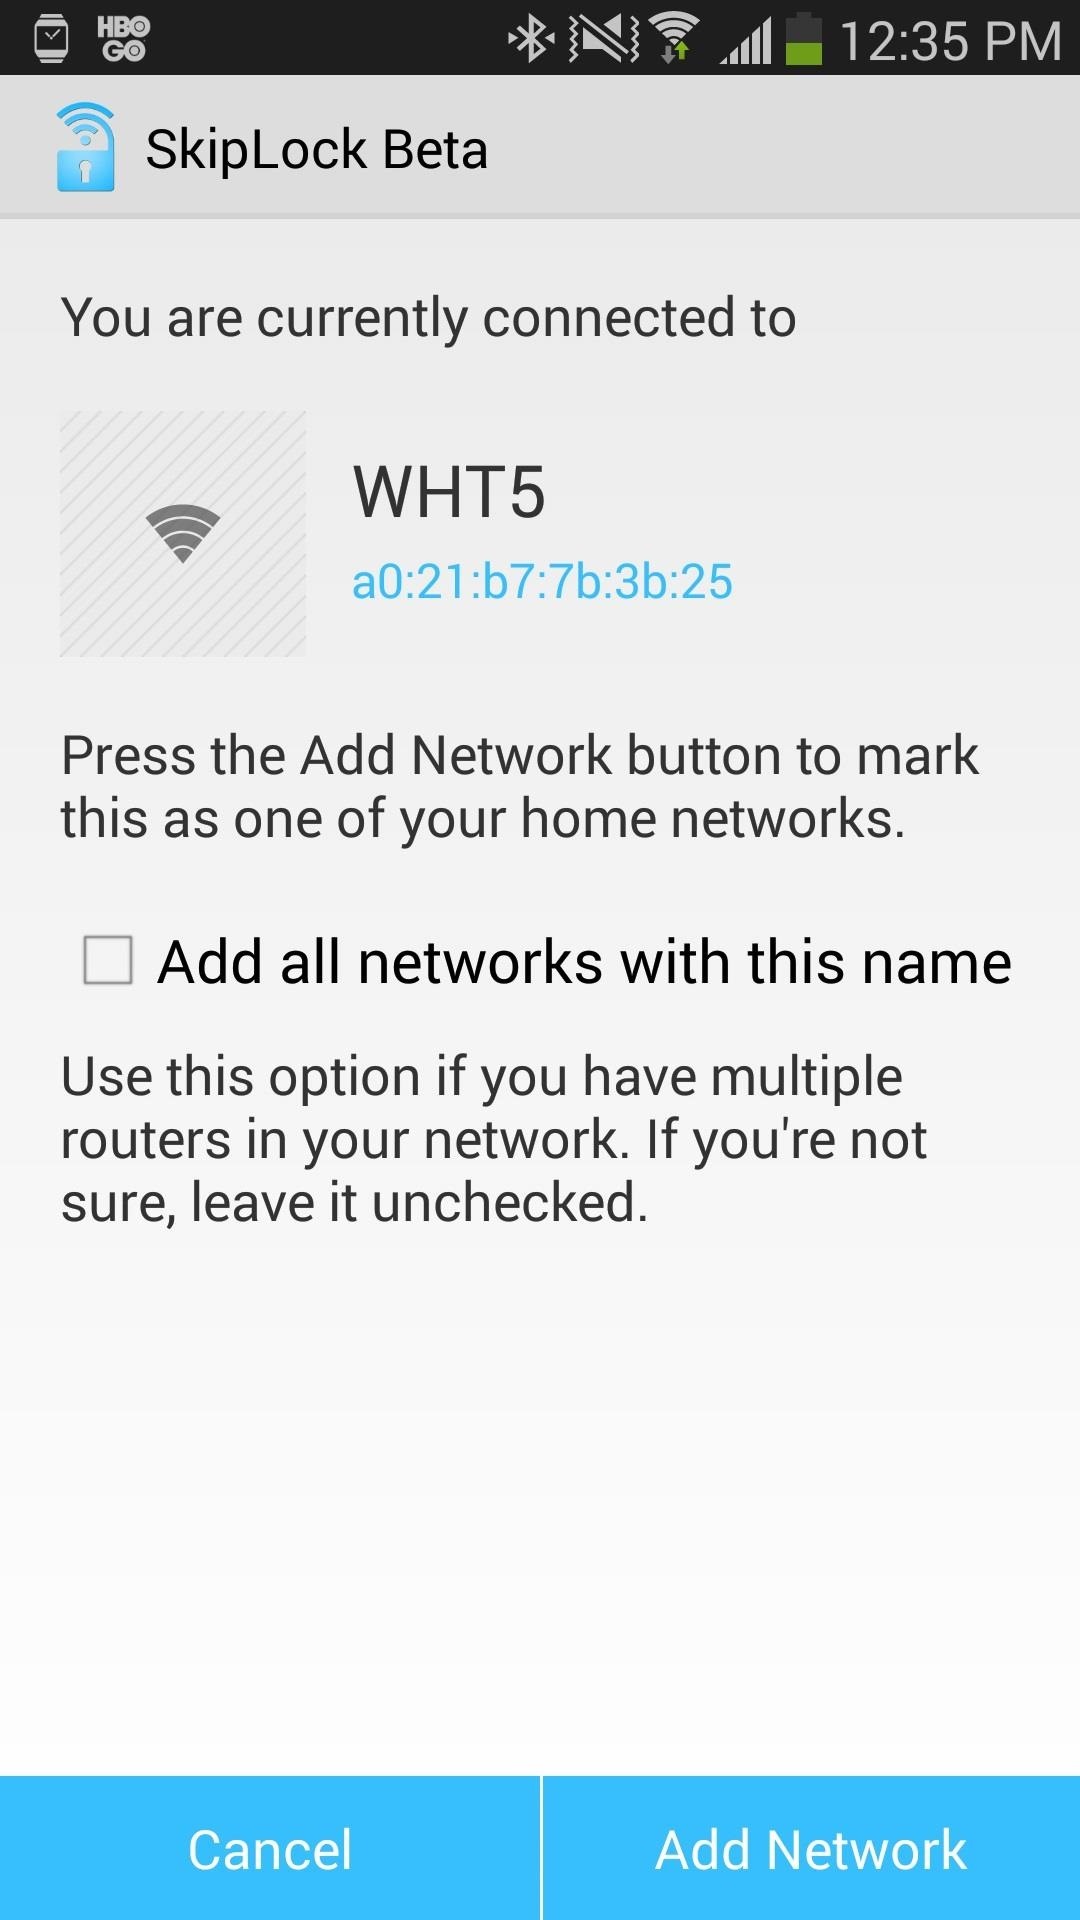 How to Skip Lock Screen Security on Your Samsung Galaxy Note 3 When Using Trusted Networks